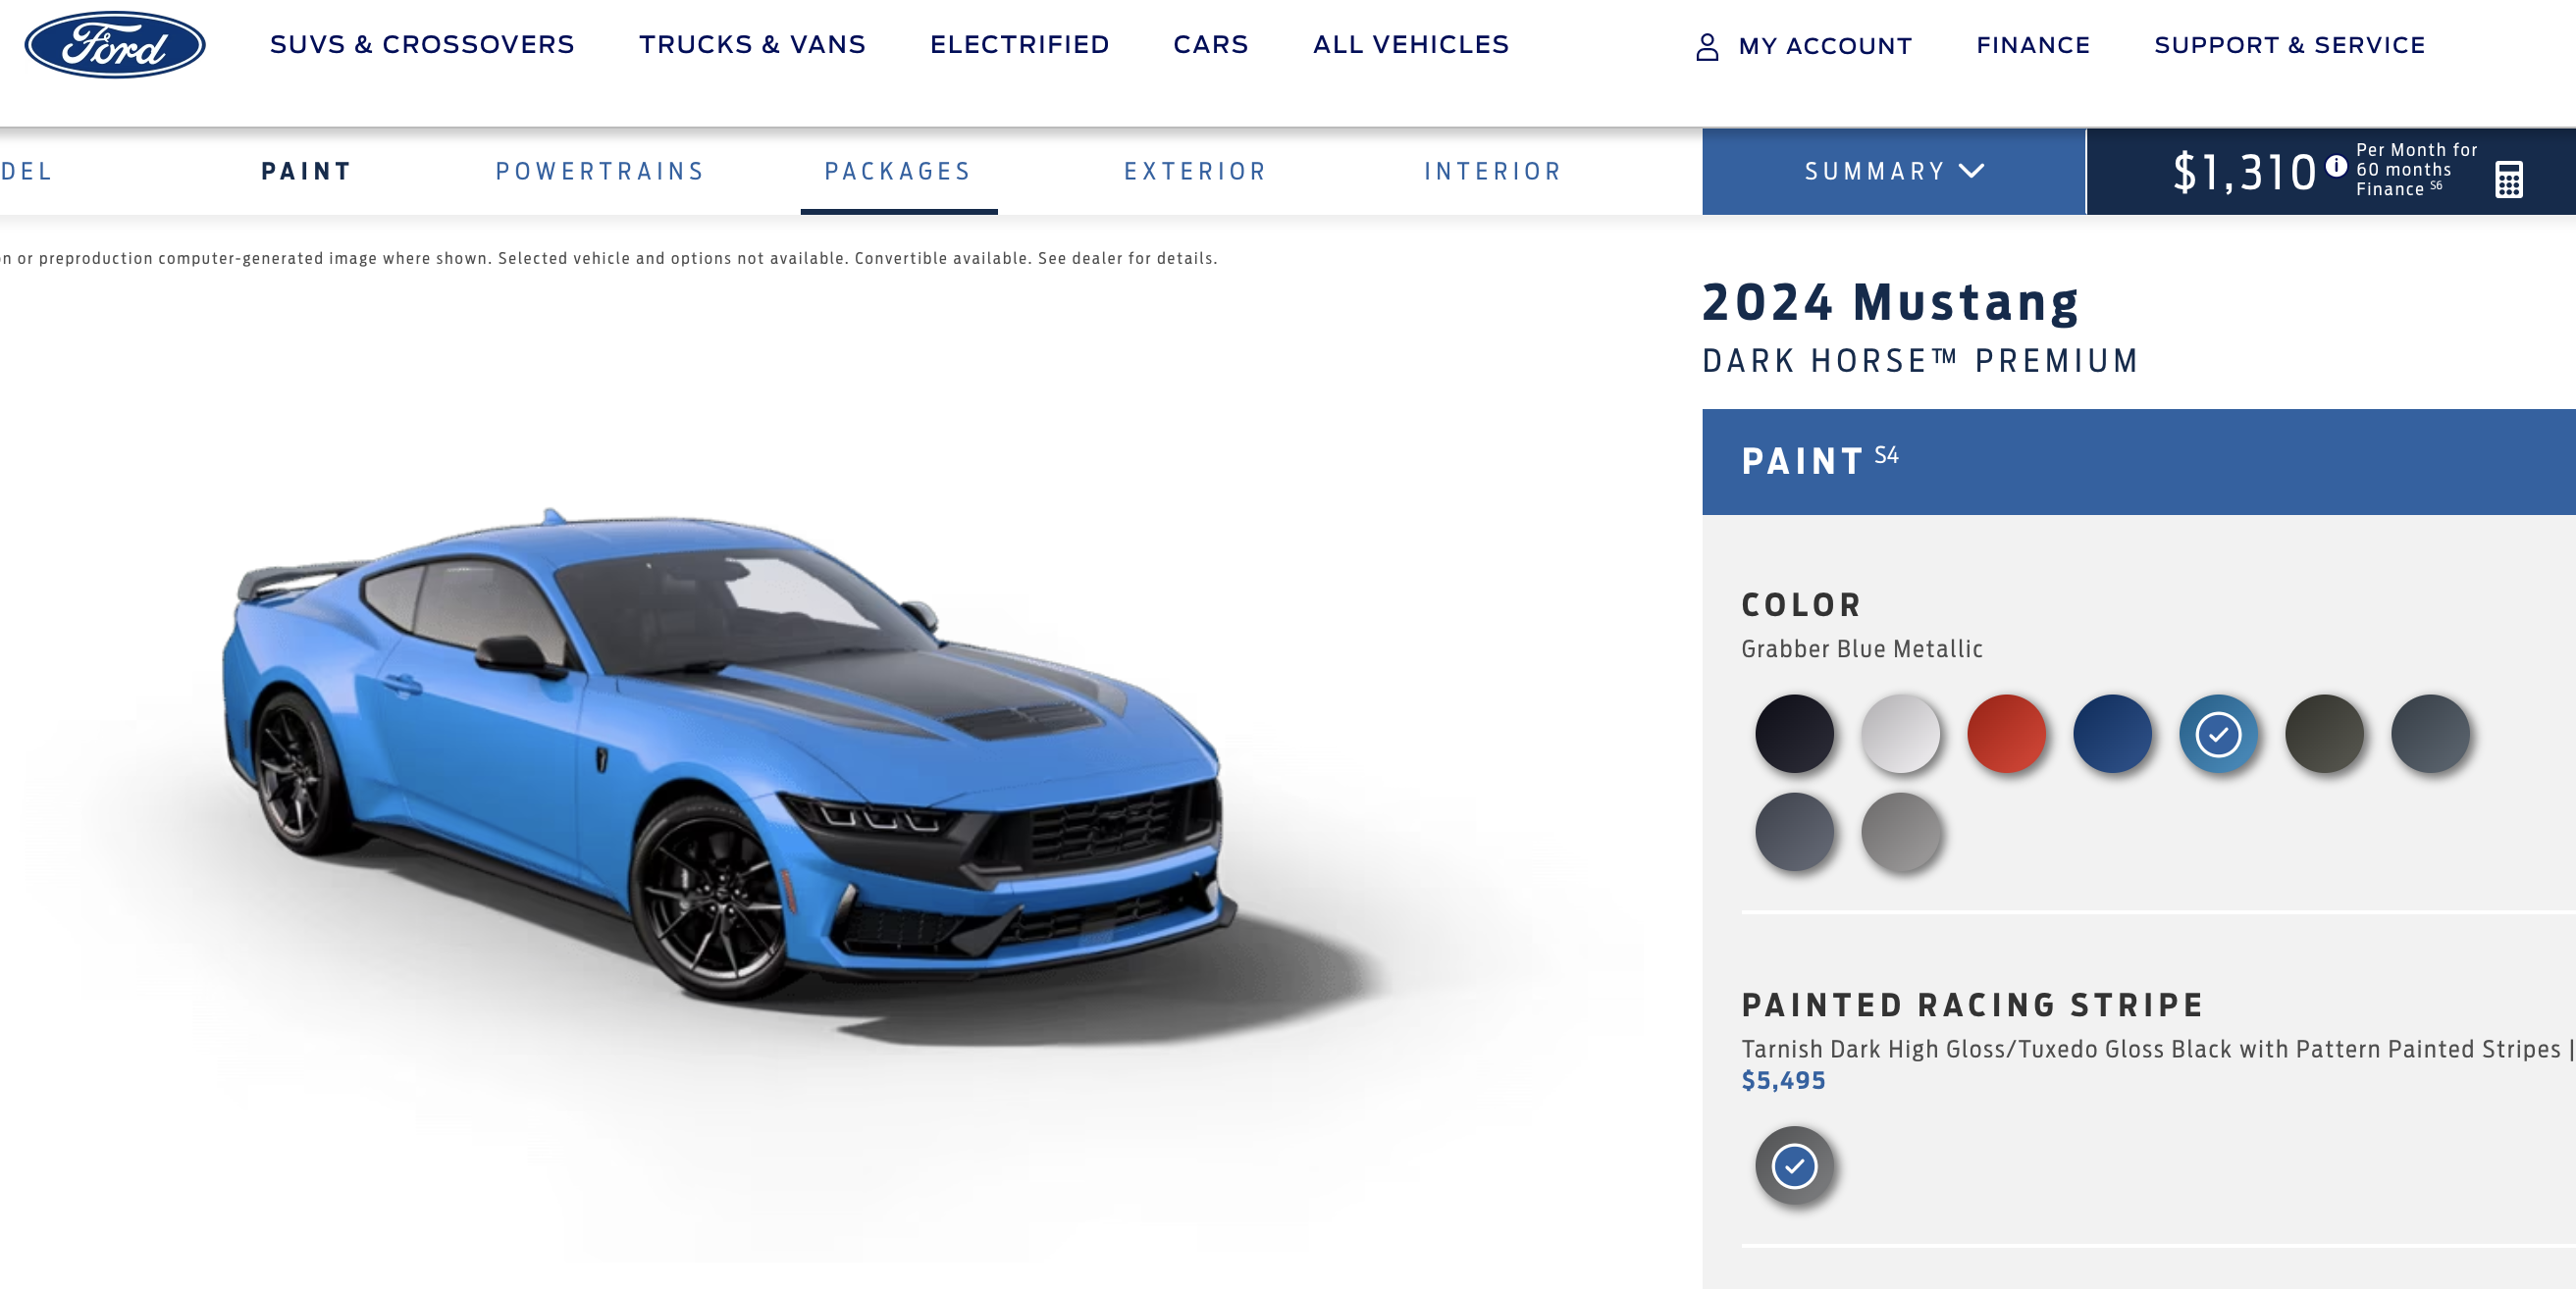 How Will You Configure Your 2024 Ford Mustang?